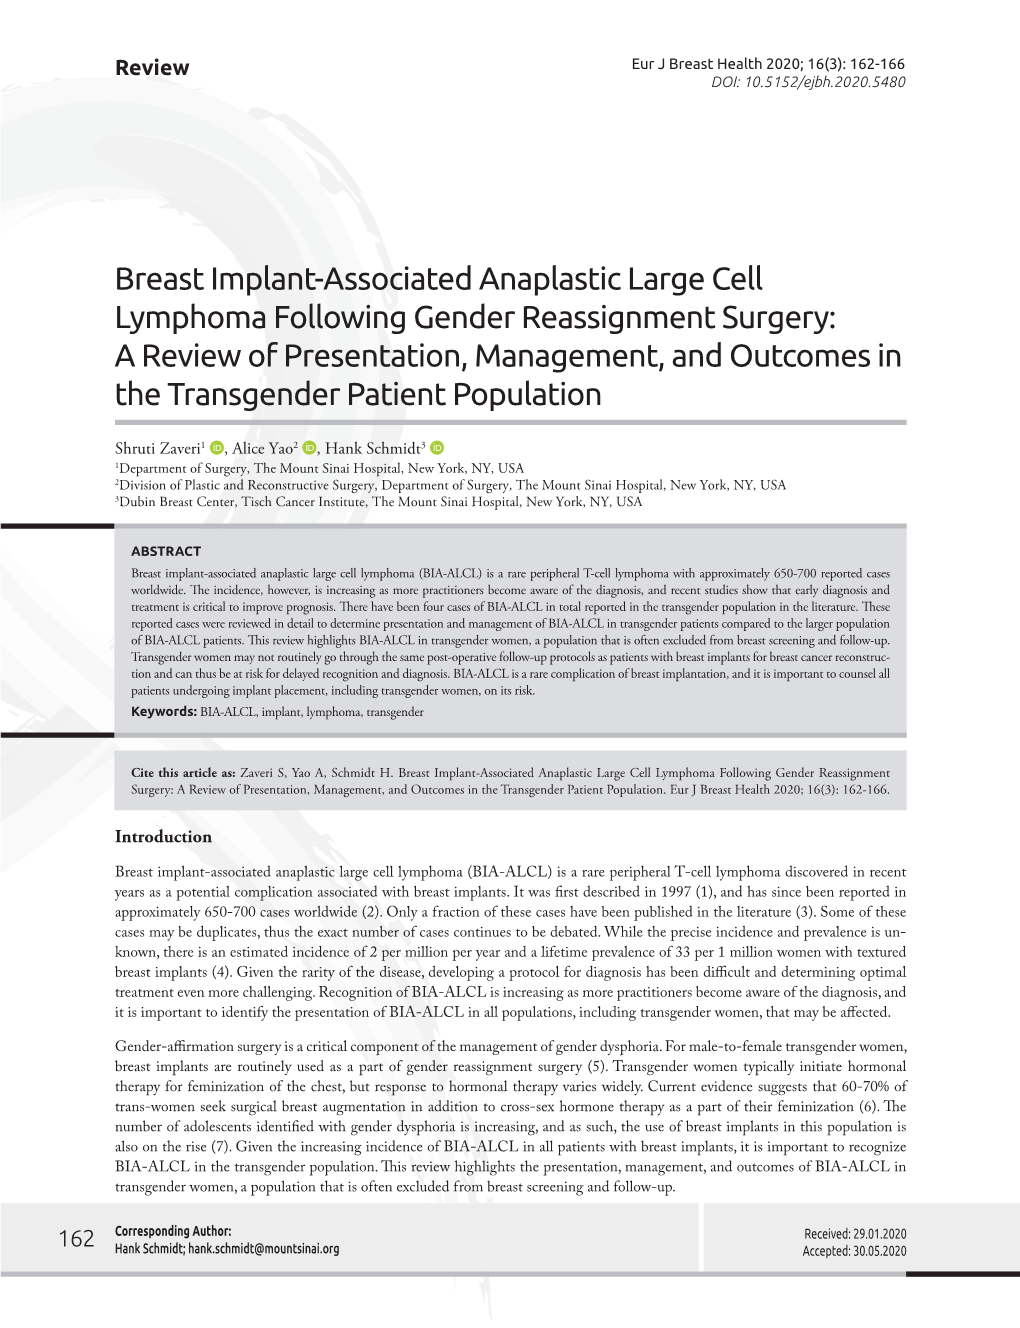 Breast Implant-Associated Anaplastic Large Cell Lymphoma Following